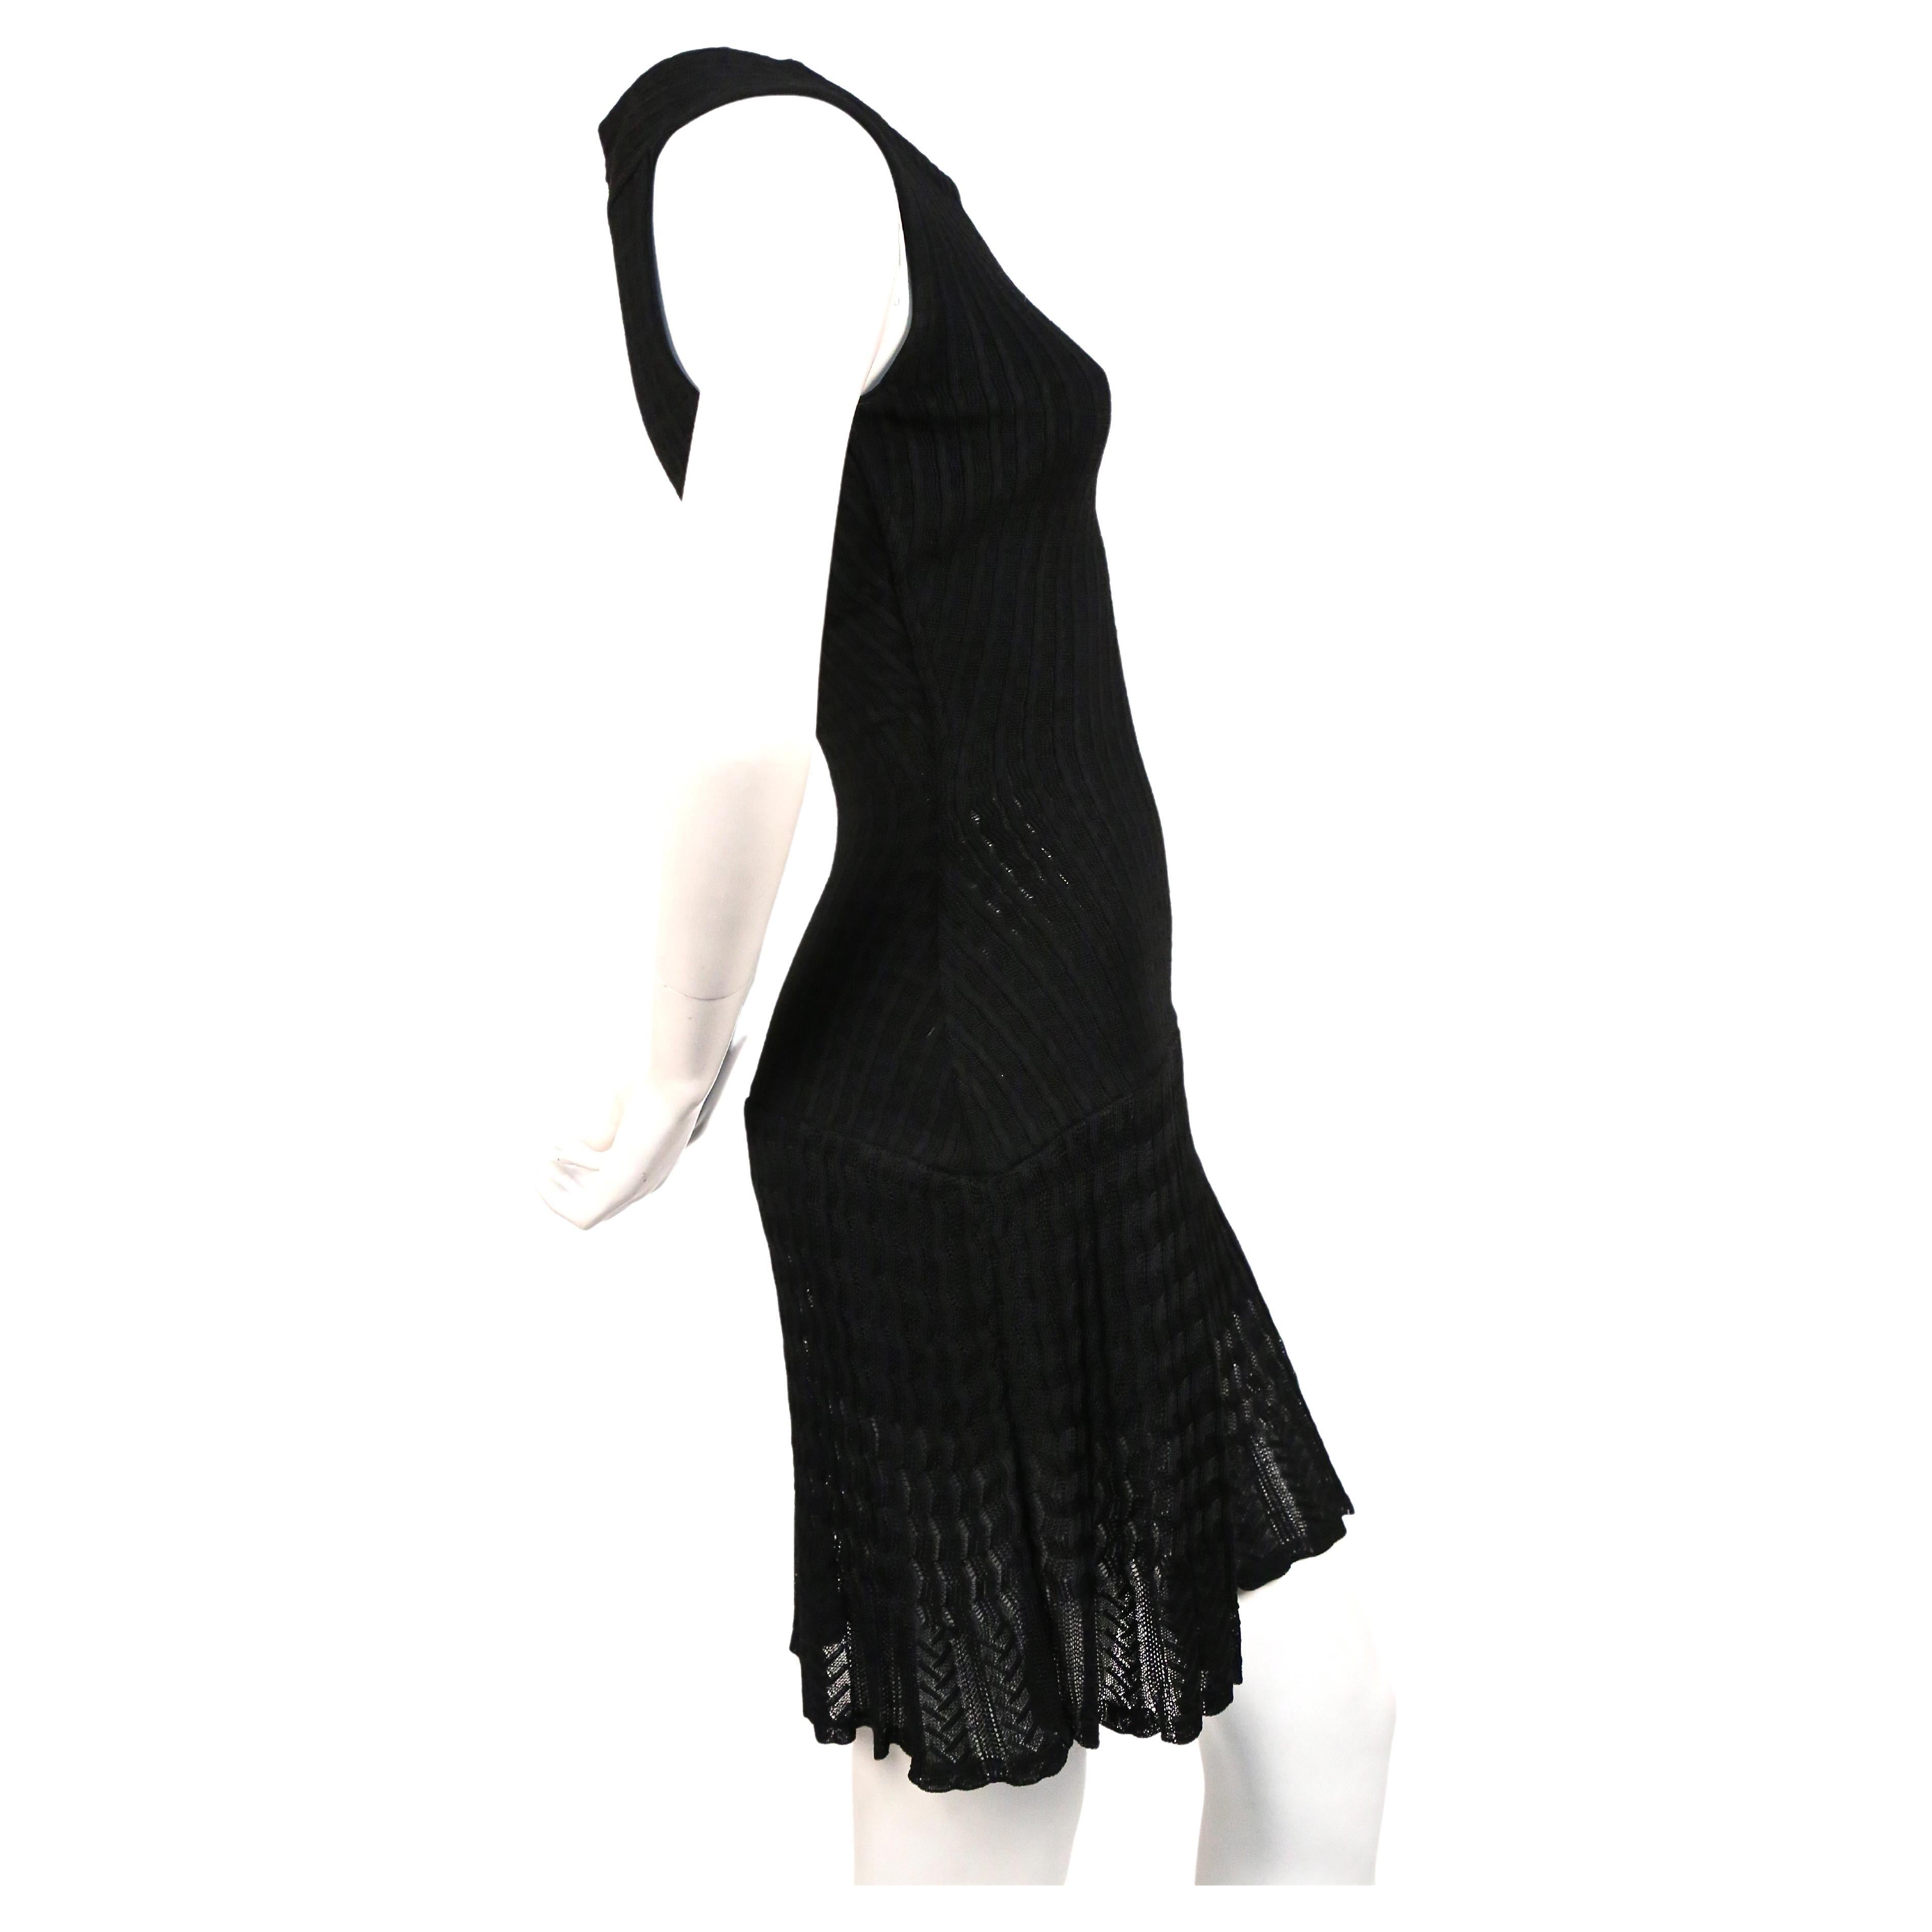 Jet black knit wool dress with semi sheer crocheted detail from Alaia dating to the 1990's. Labeled a size small. Measures approximately (unstretched): 12.75